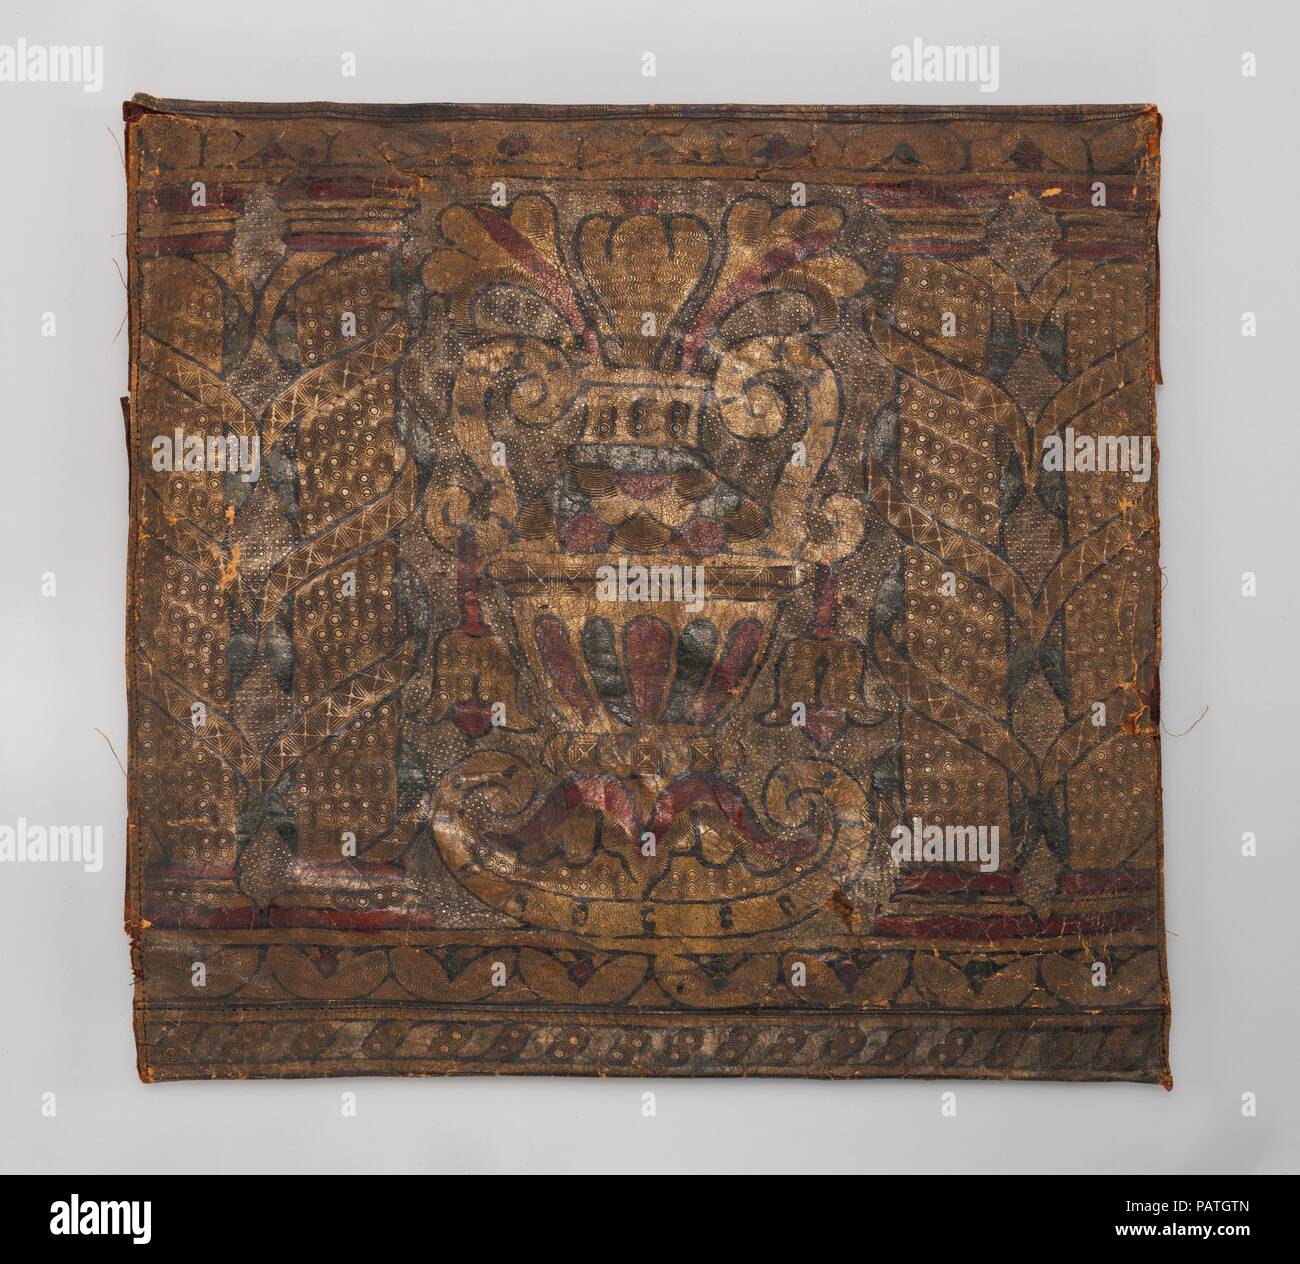 Chair seat cushion. Culture: Italian or Spanish. Dimensions: 25.5 x 37.5 cm (14 X 14 3/4 in). Date: 17th century. Museum: Metropolitan Museum of Art, New York, USA. Stock Photo